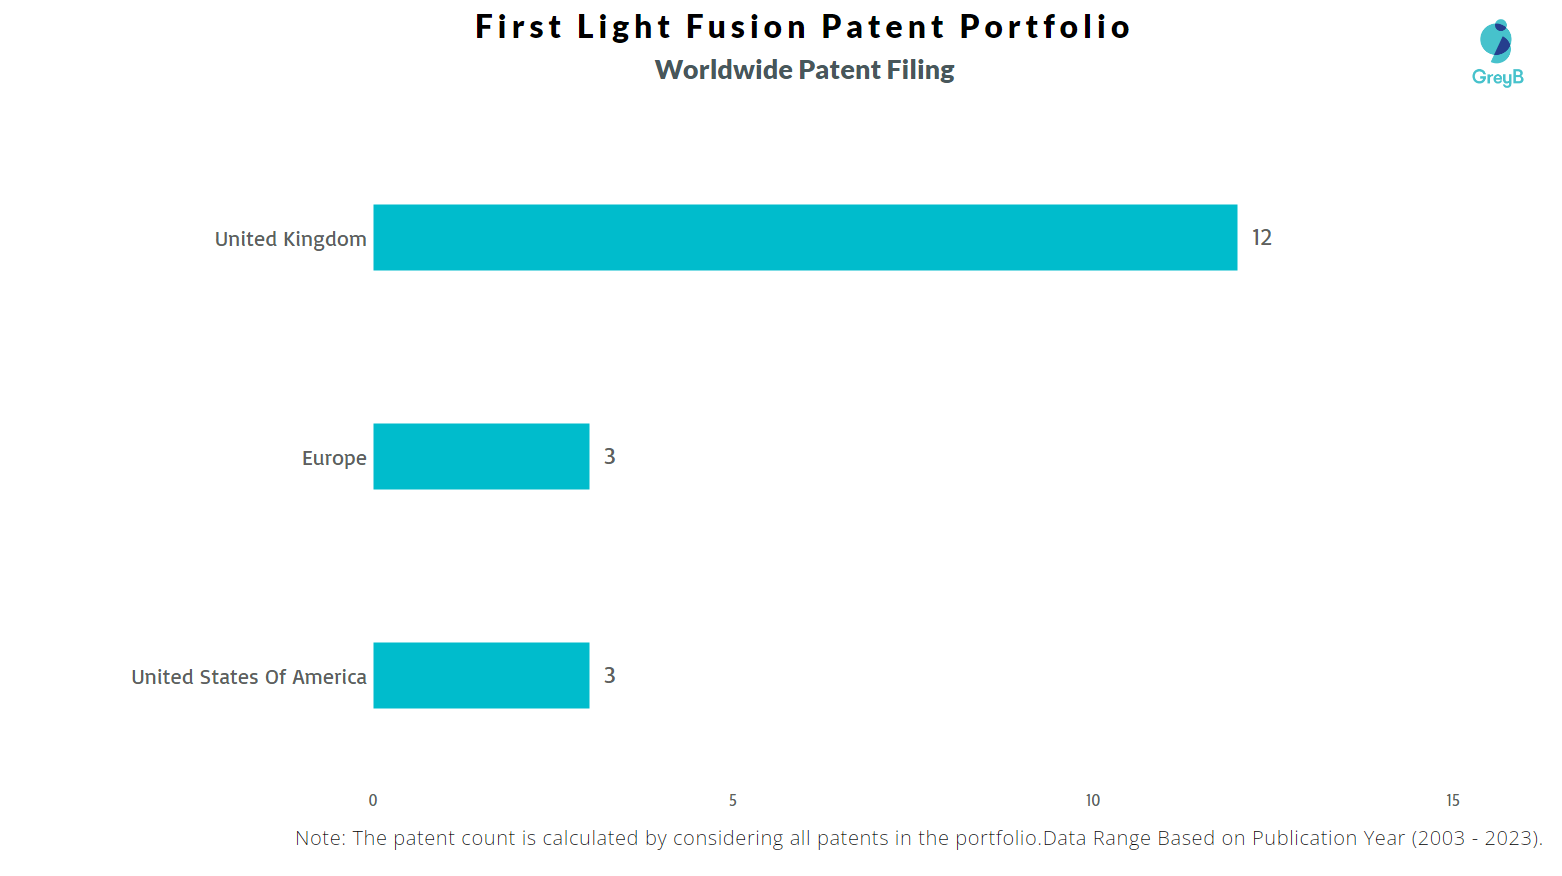 First Light Fusion Worldwide Patent Filing